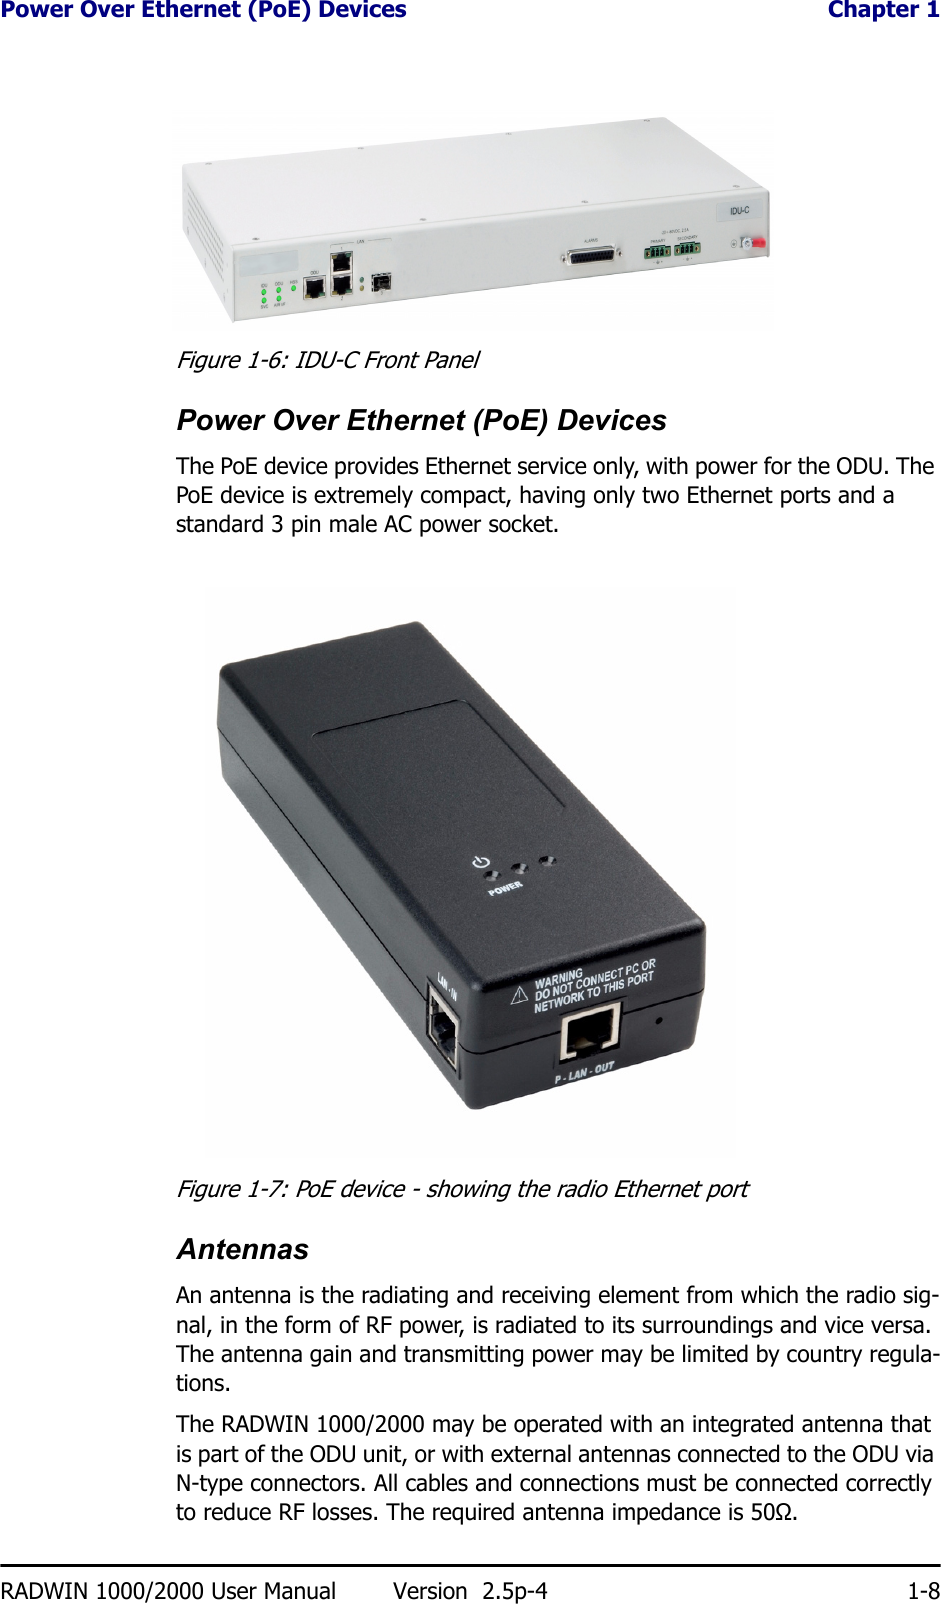 Power Over Ethernet (PoE) Devices  Chapter 1RADWIN 1000/2000 User Manual Version  2.5p-4 1-8Figure 1-6: IDU-C Front PanelPower Over Ethernet (PoE) DevicesThe PoE device provides Ethernet service only, with power for the ODU. The PoE device is extremely compact, having only two Ethernet ports and a standard 3 pin male AC power socket.Figure 1-7: PoE device - showing the radio Ethernet portAntennasAn antenna is the radiating and receiving element from which the radio sig-nal, in the form of RF power, is radiated to its surroundings and vice versa. The antenna gain and transmitting power may be limited by country regula-tions.The RADWIN 1000/2000 may be operated with an integrated antenna that is part of the ODU unit, or with external antennas connected to the ODU via N-type connectors. All cables and connections must be connected correctly to reduce RF losses. The required antenna impedance is 50Ω.